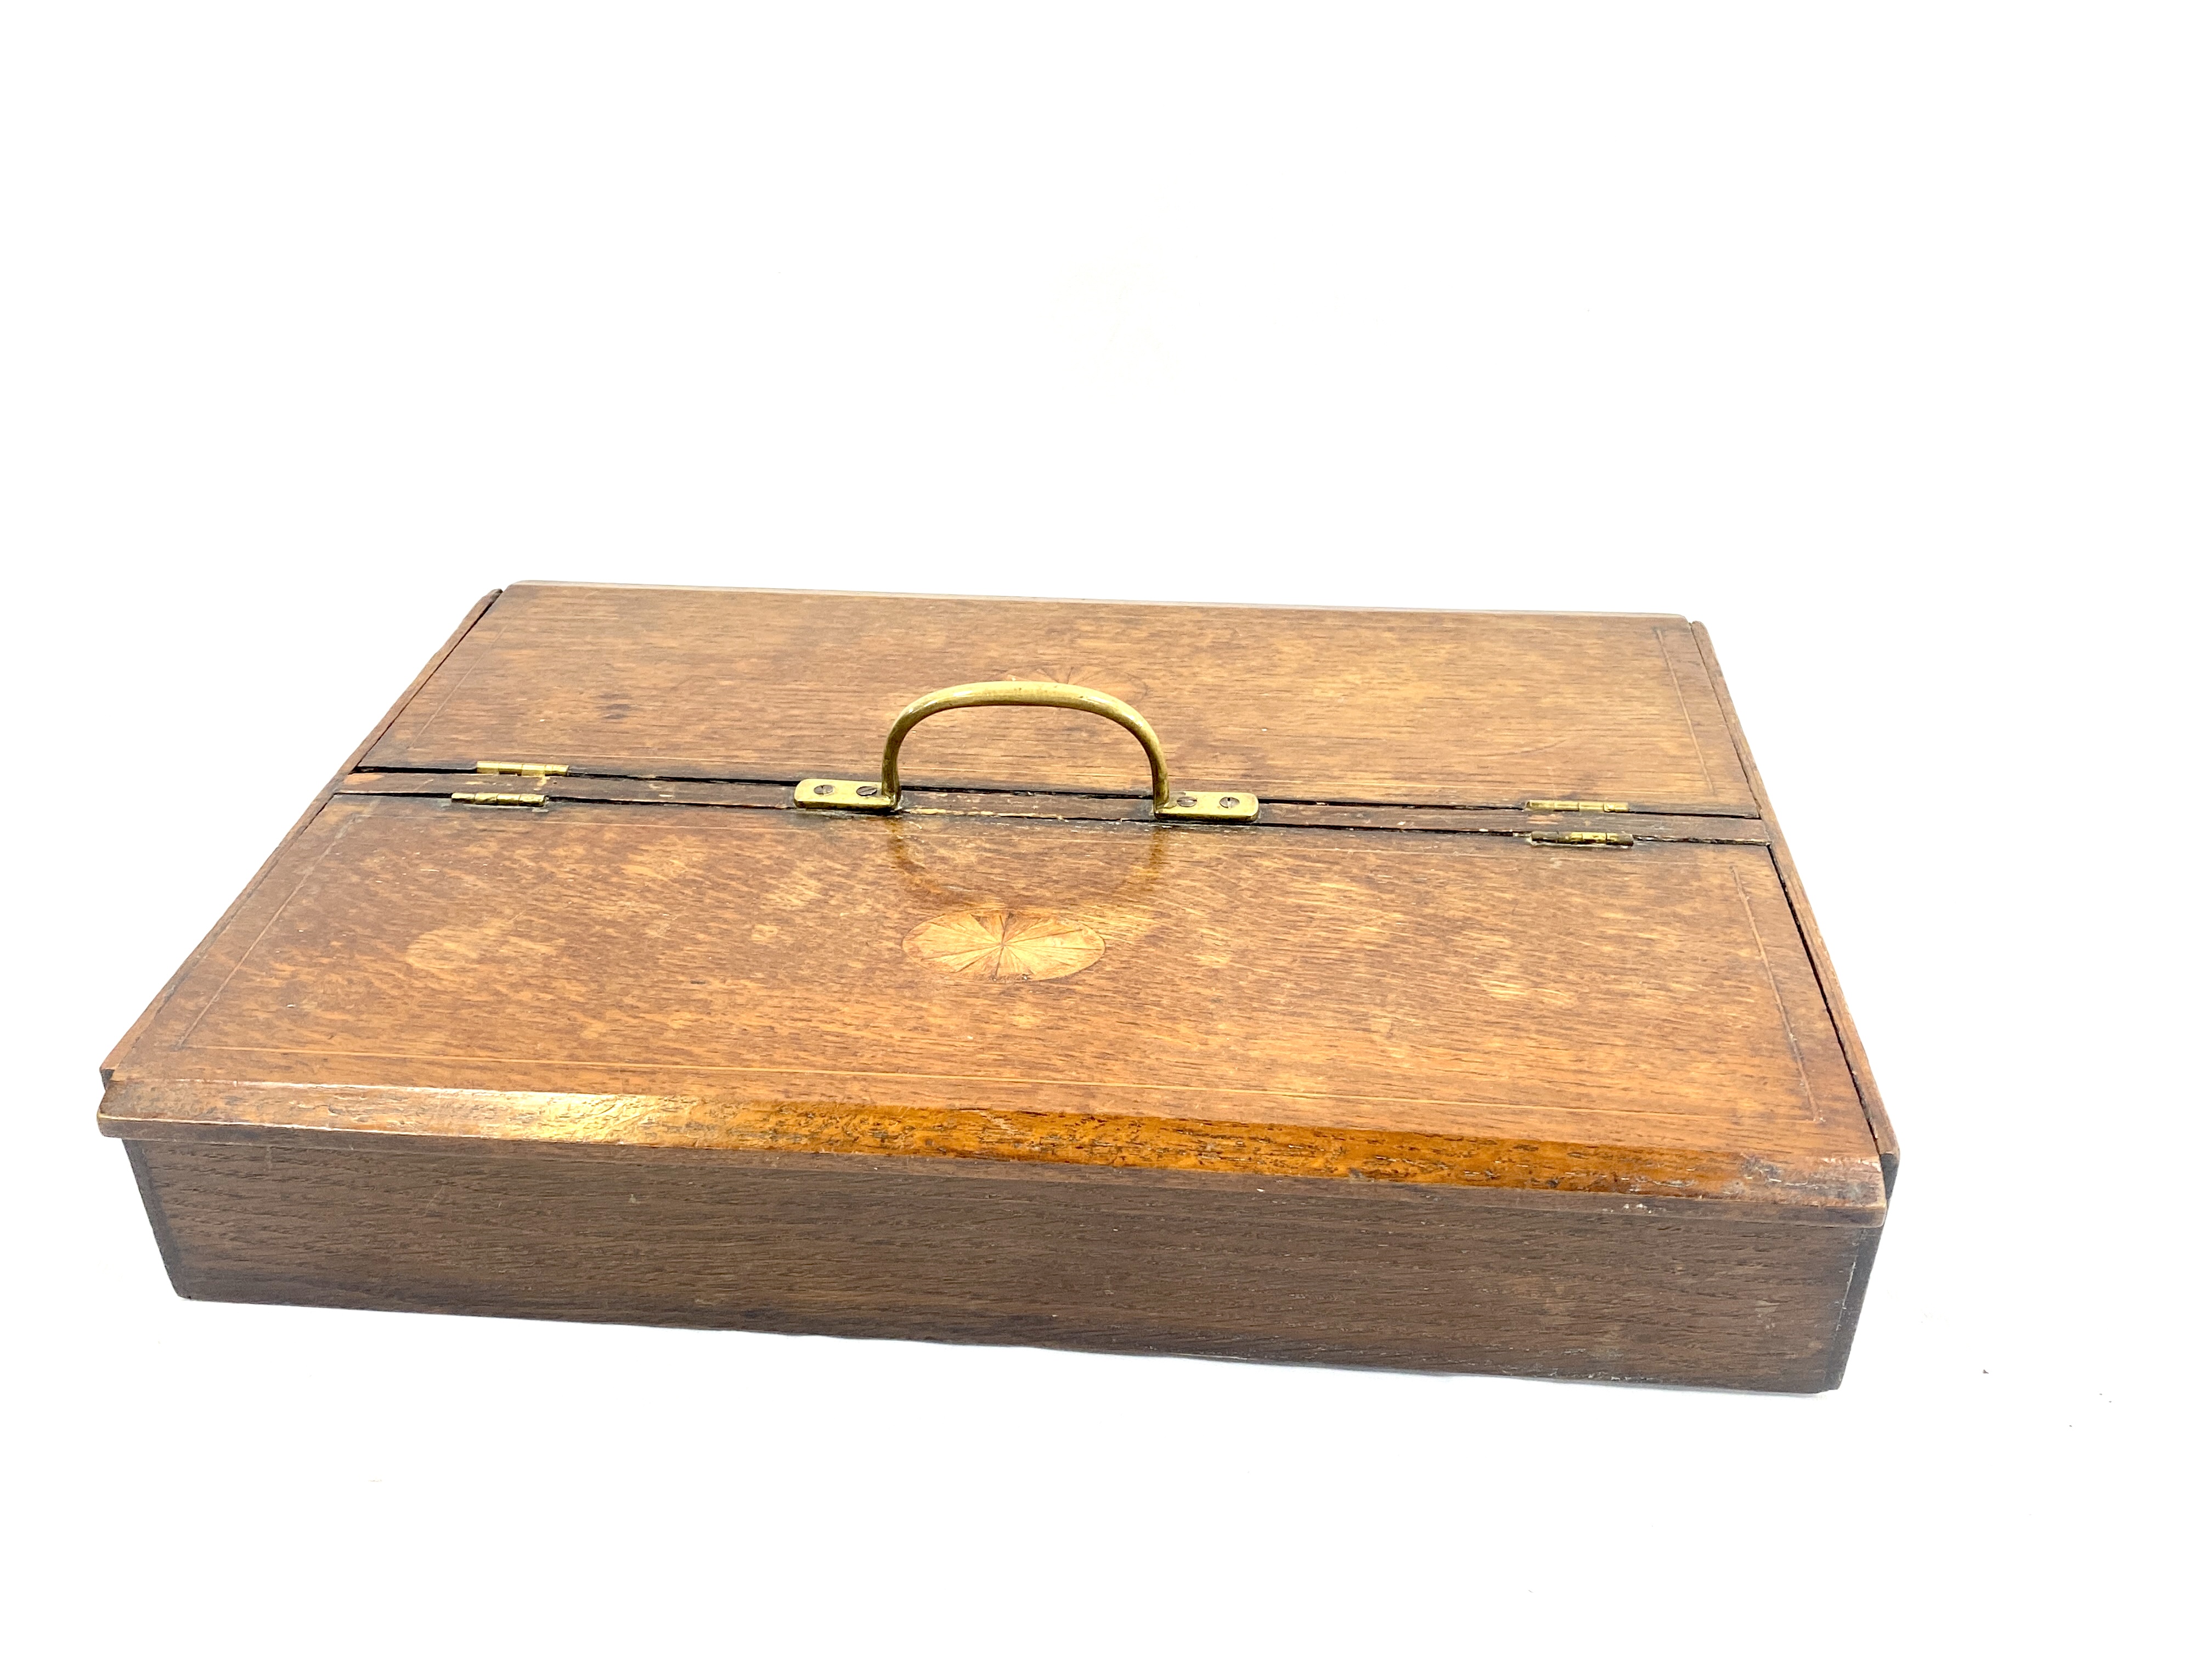 Oak cutlery box with lifting lid